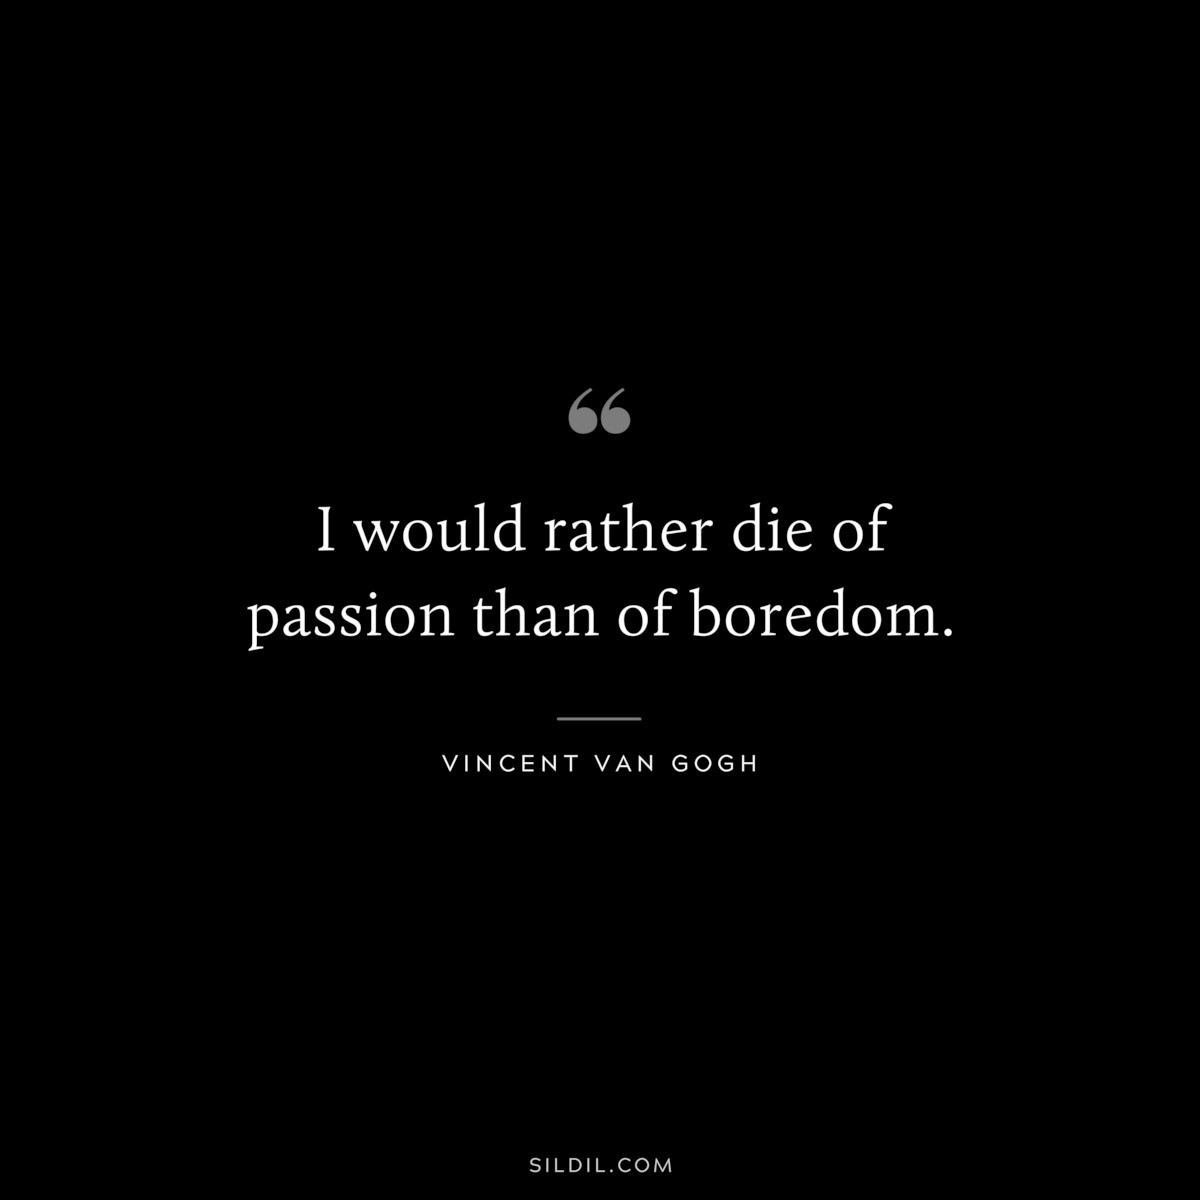 I would rather die of passion than of boredom. ― Vincent van Gogh